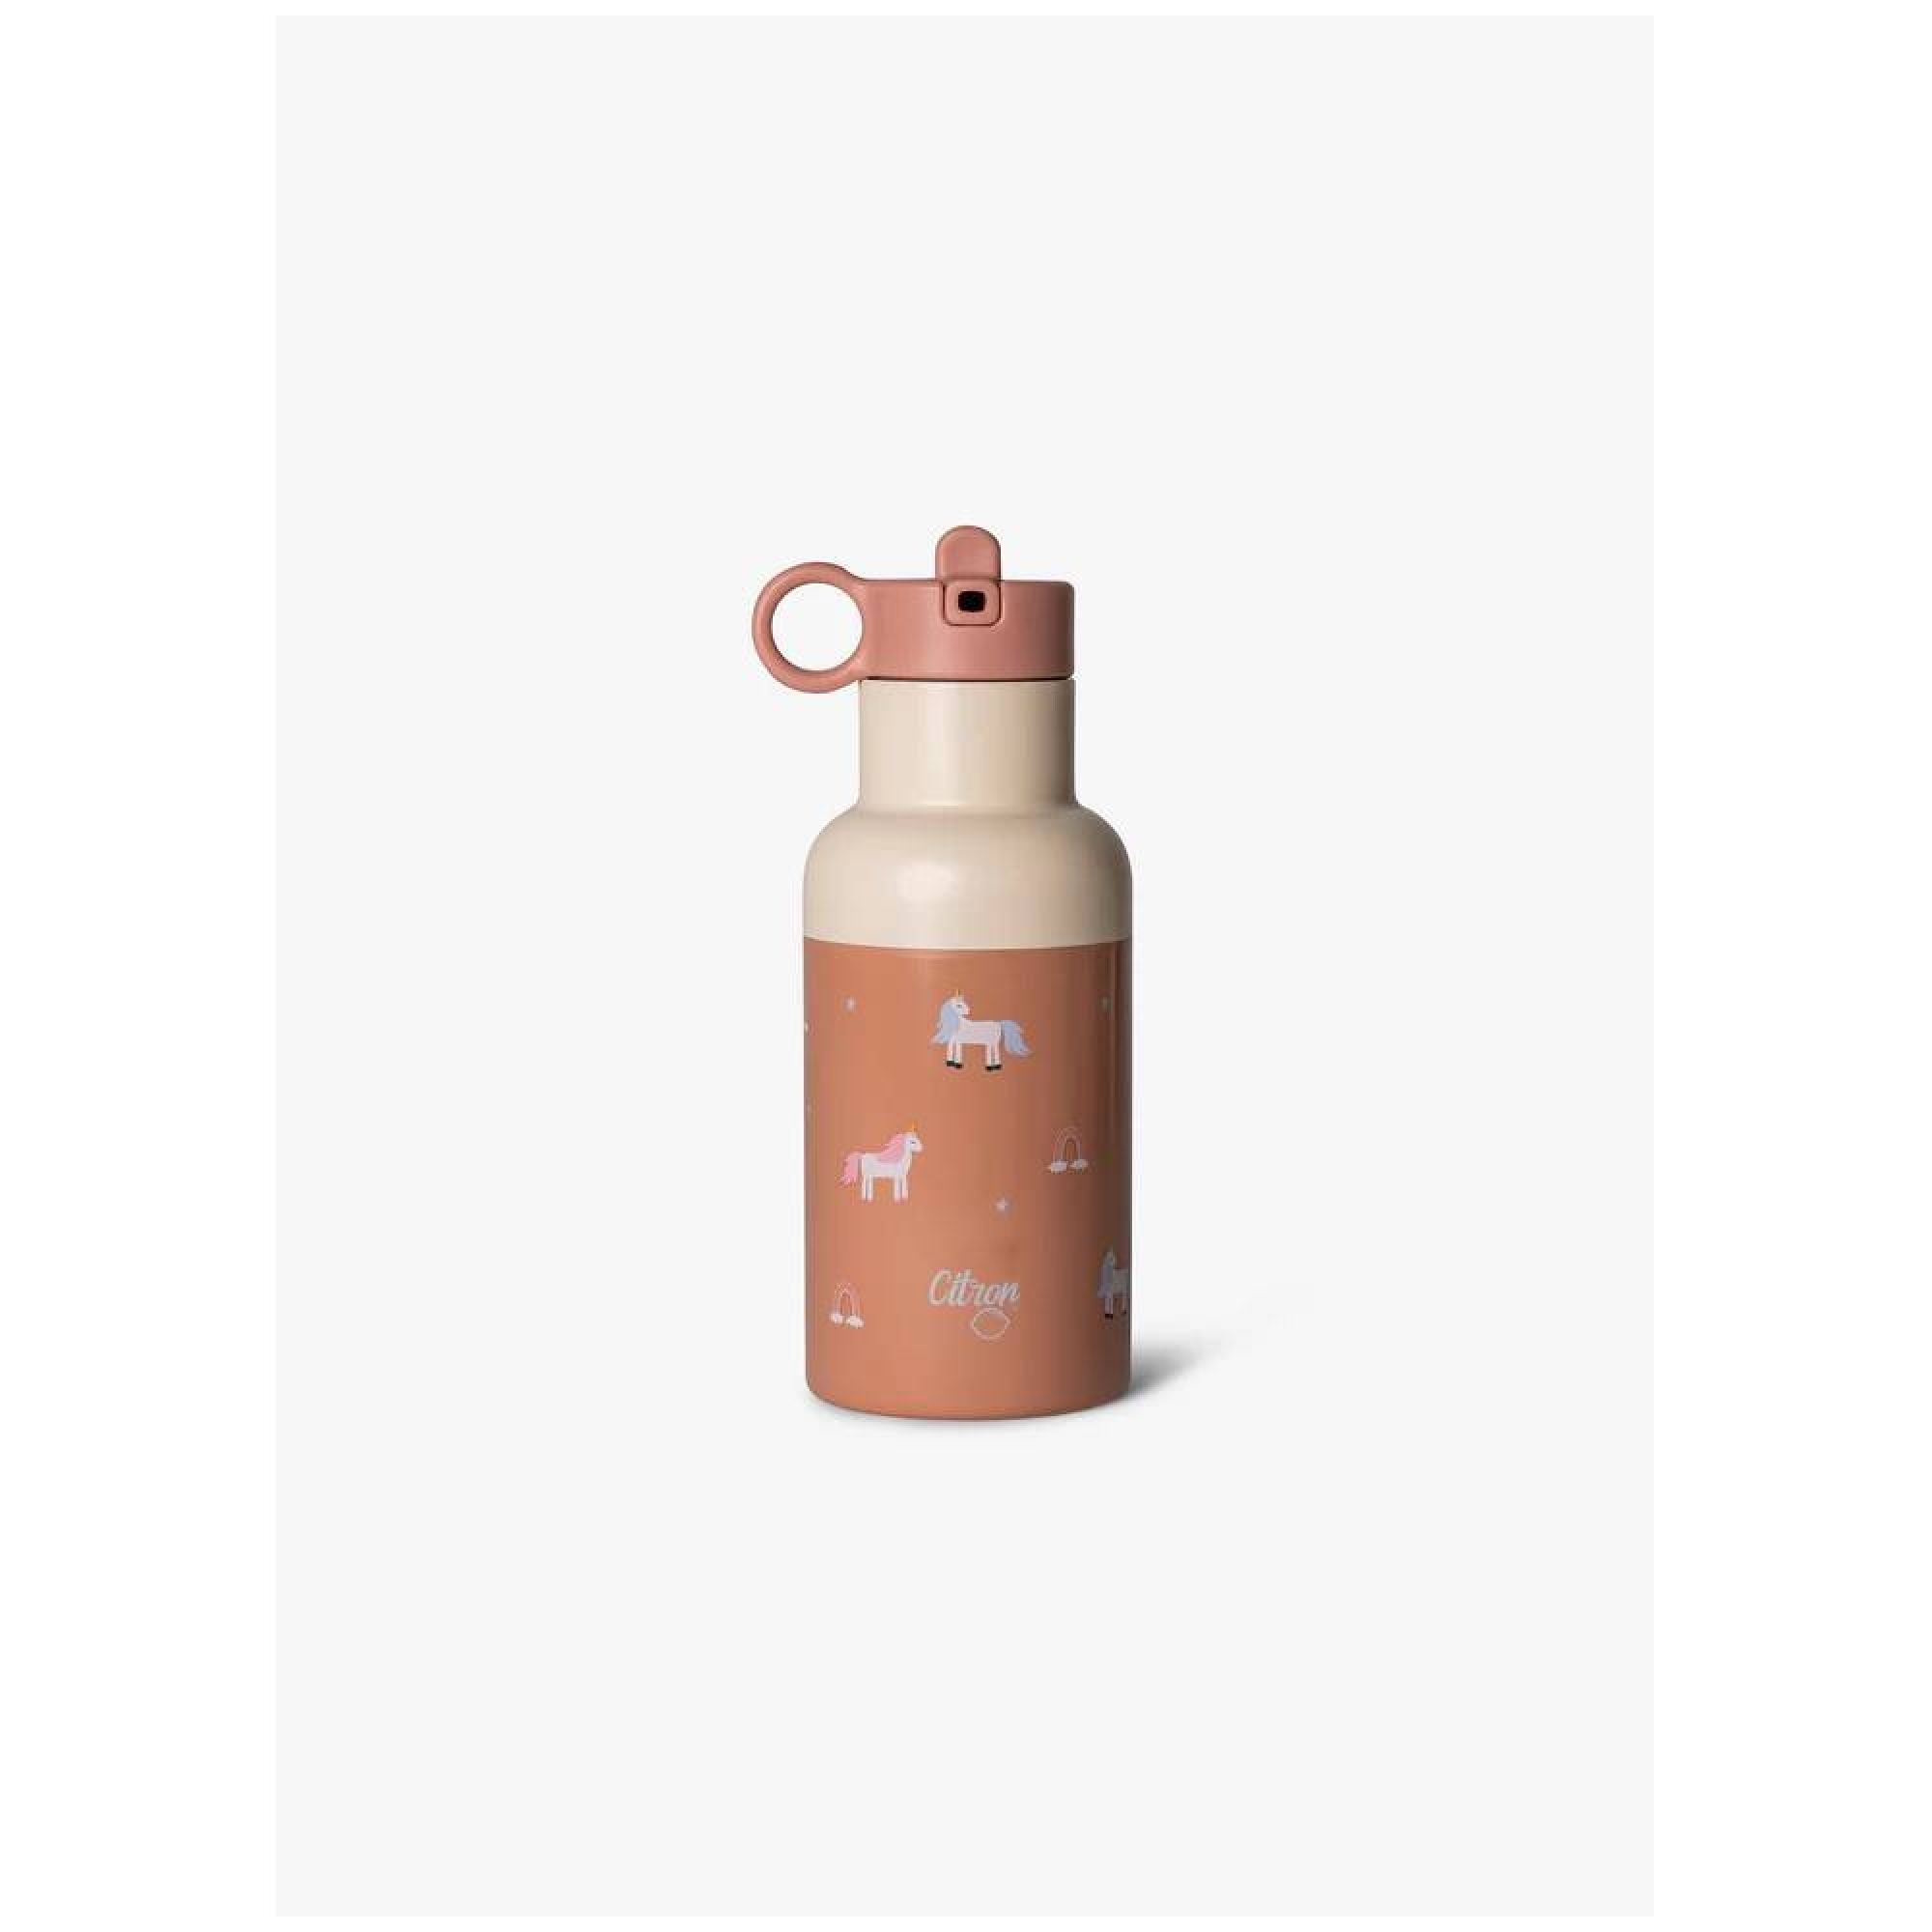 Petite gourde isotherme - 350ml - Licorne - Rose poudré